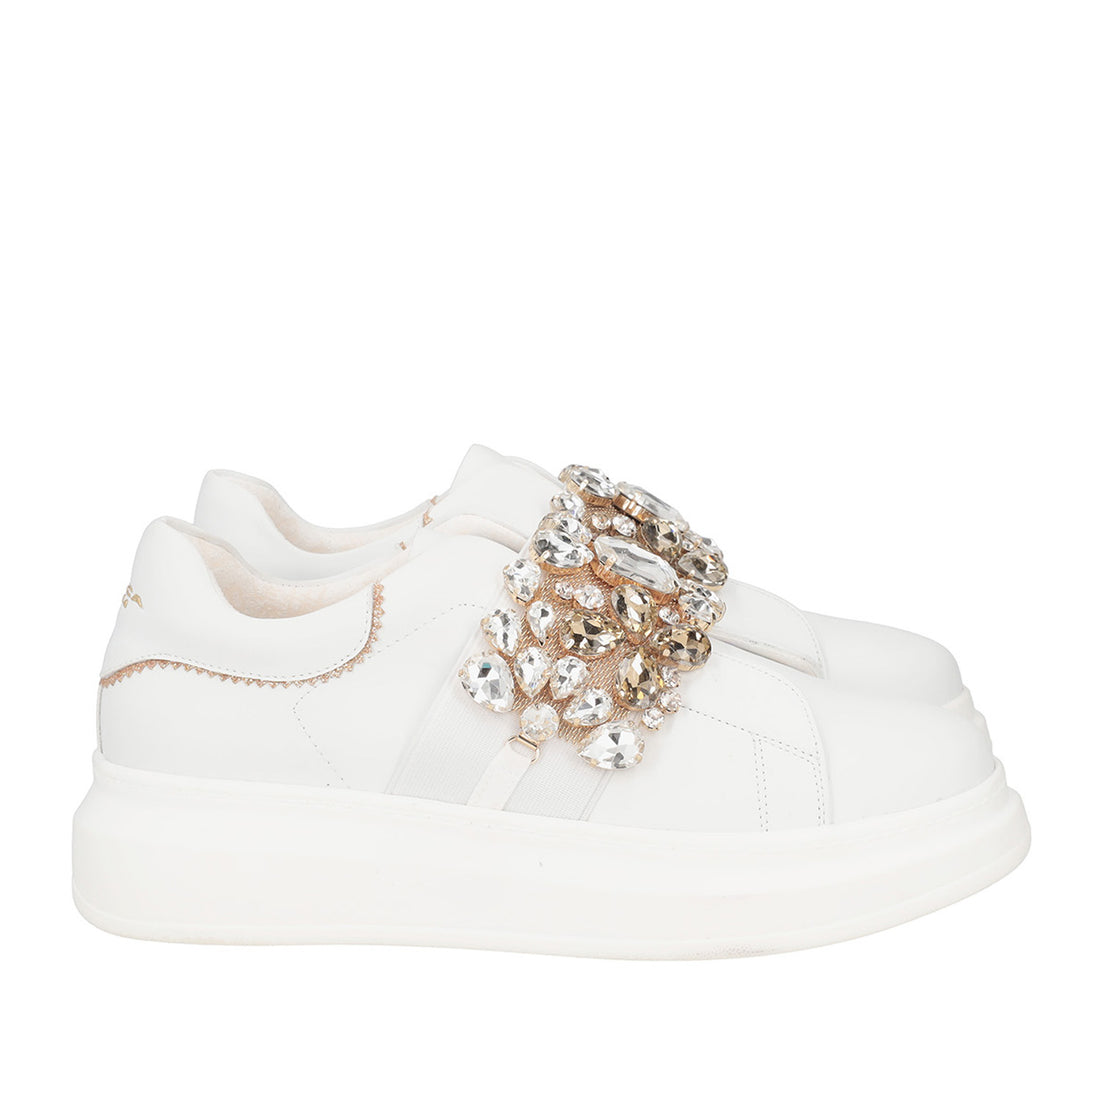 WHITE GLAMOUR SNEAKER WITH RHINESTONES BAND